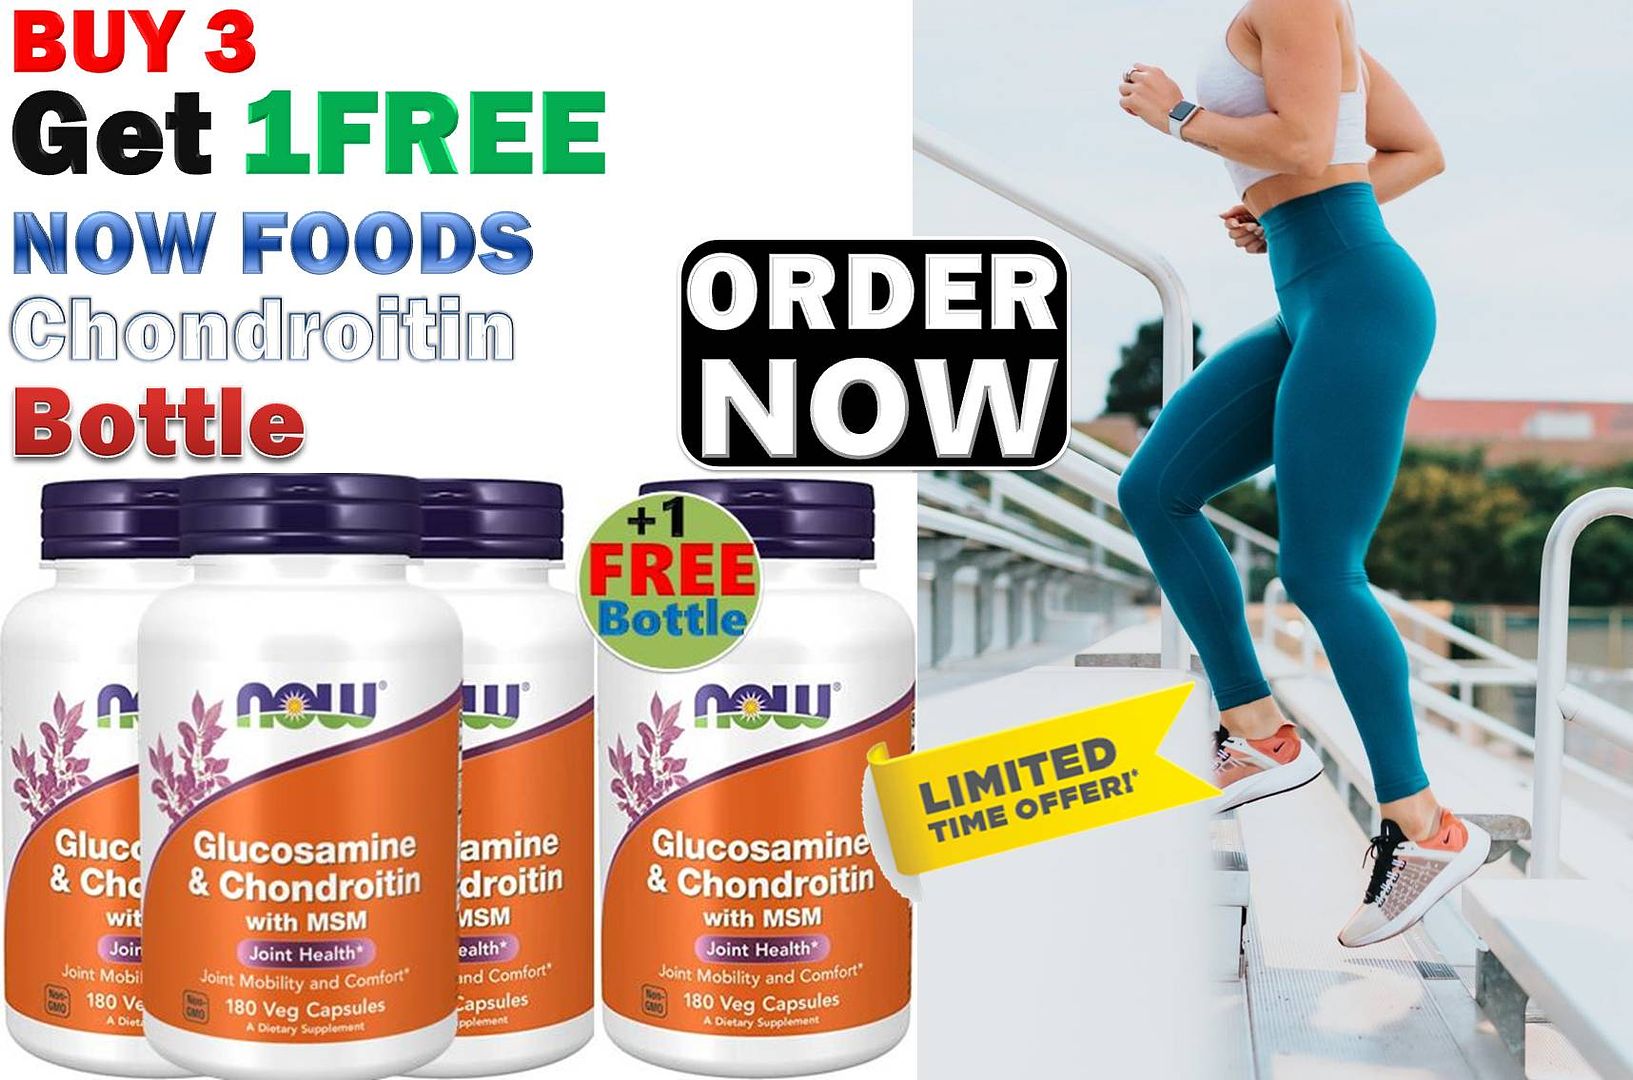 Now Chondroitin by Now Foods